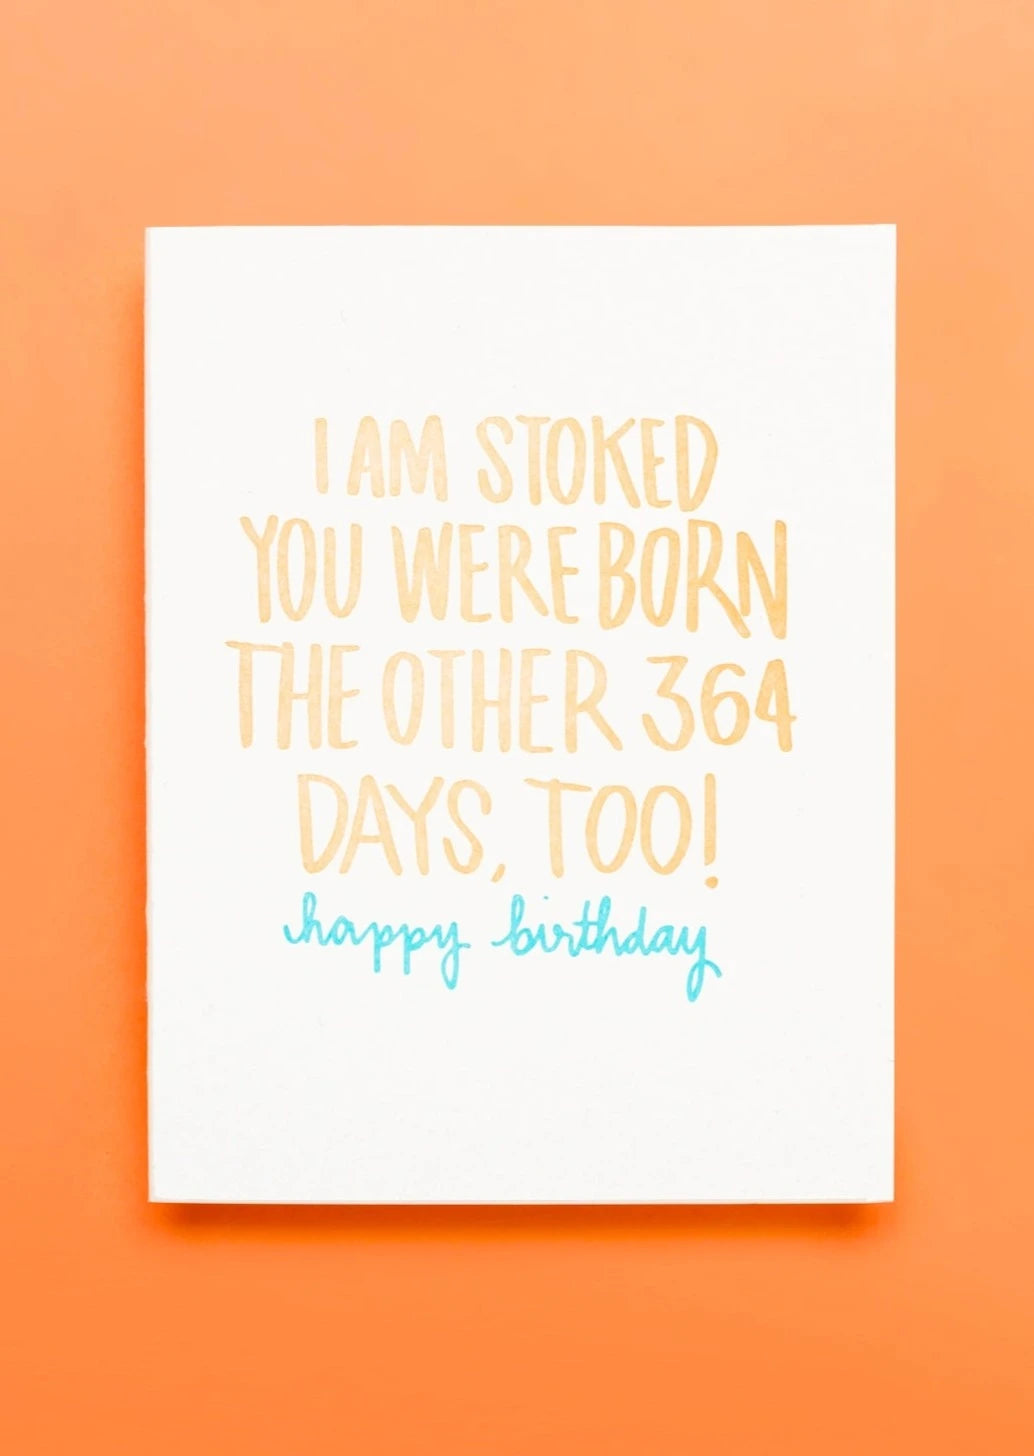 Stoked You Were Born Card